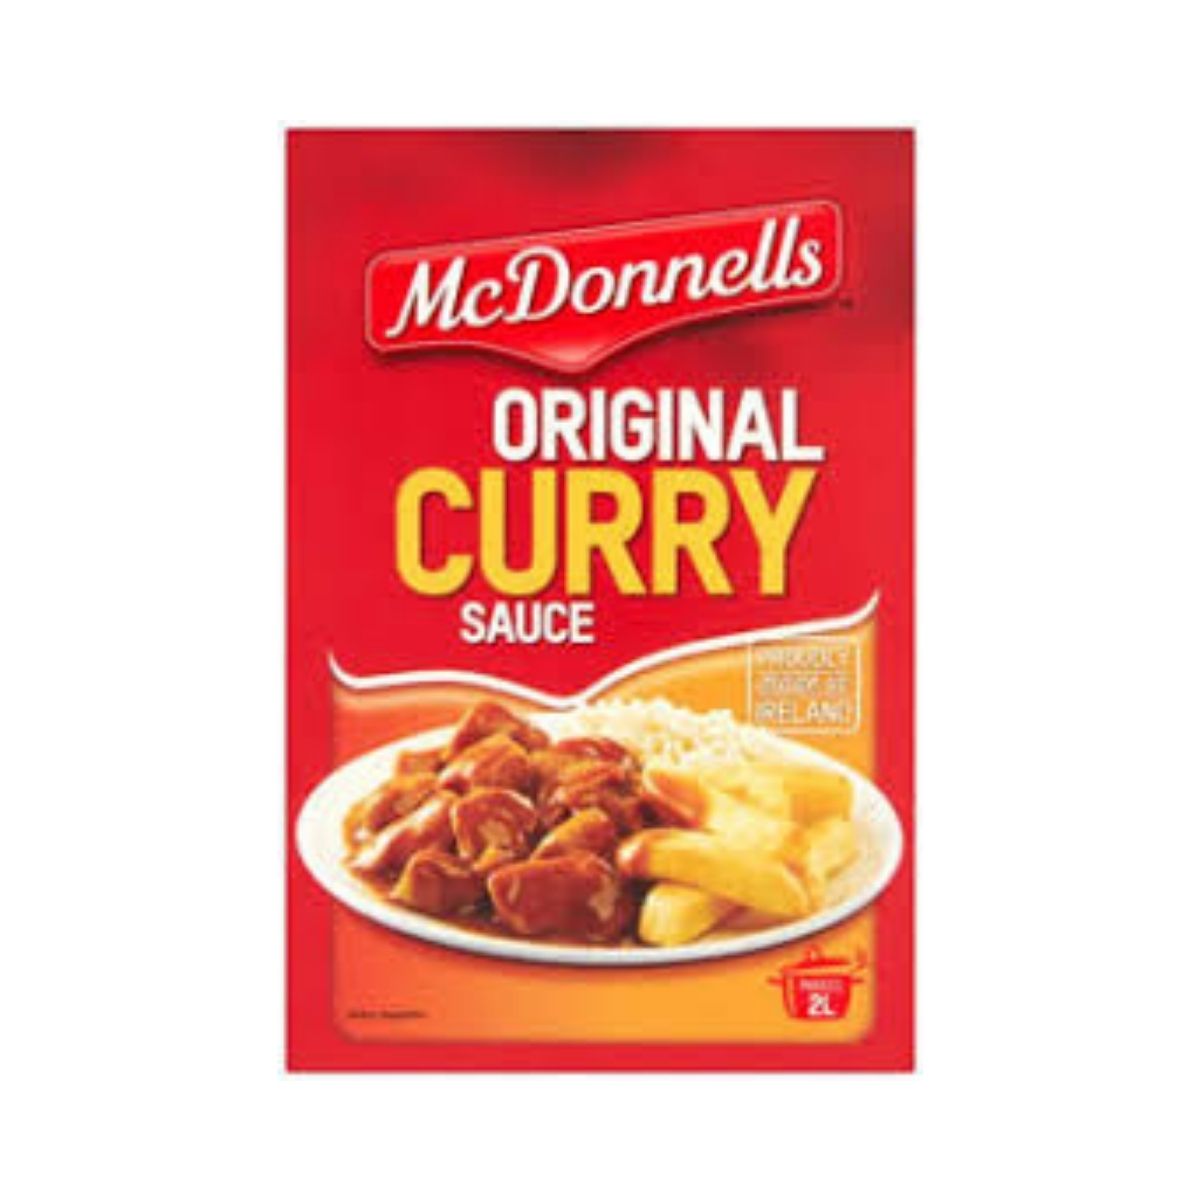 McDonnell's Curry 500g - CMKfoods